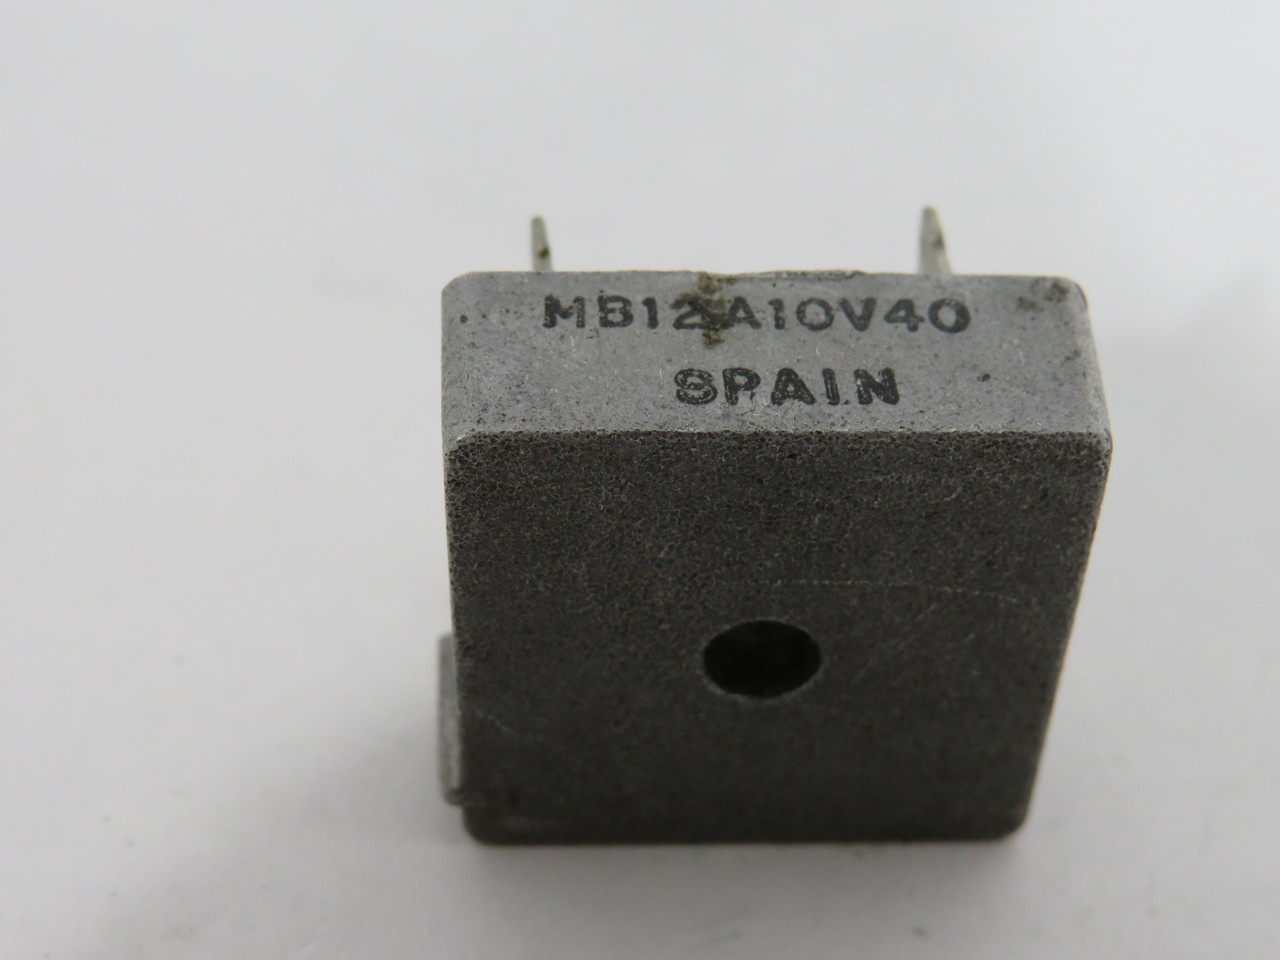 Generic MB12A10V40 Bridge Rectifier Diode 10A 400V 1Phase USED